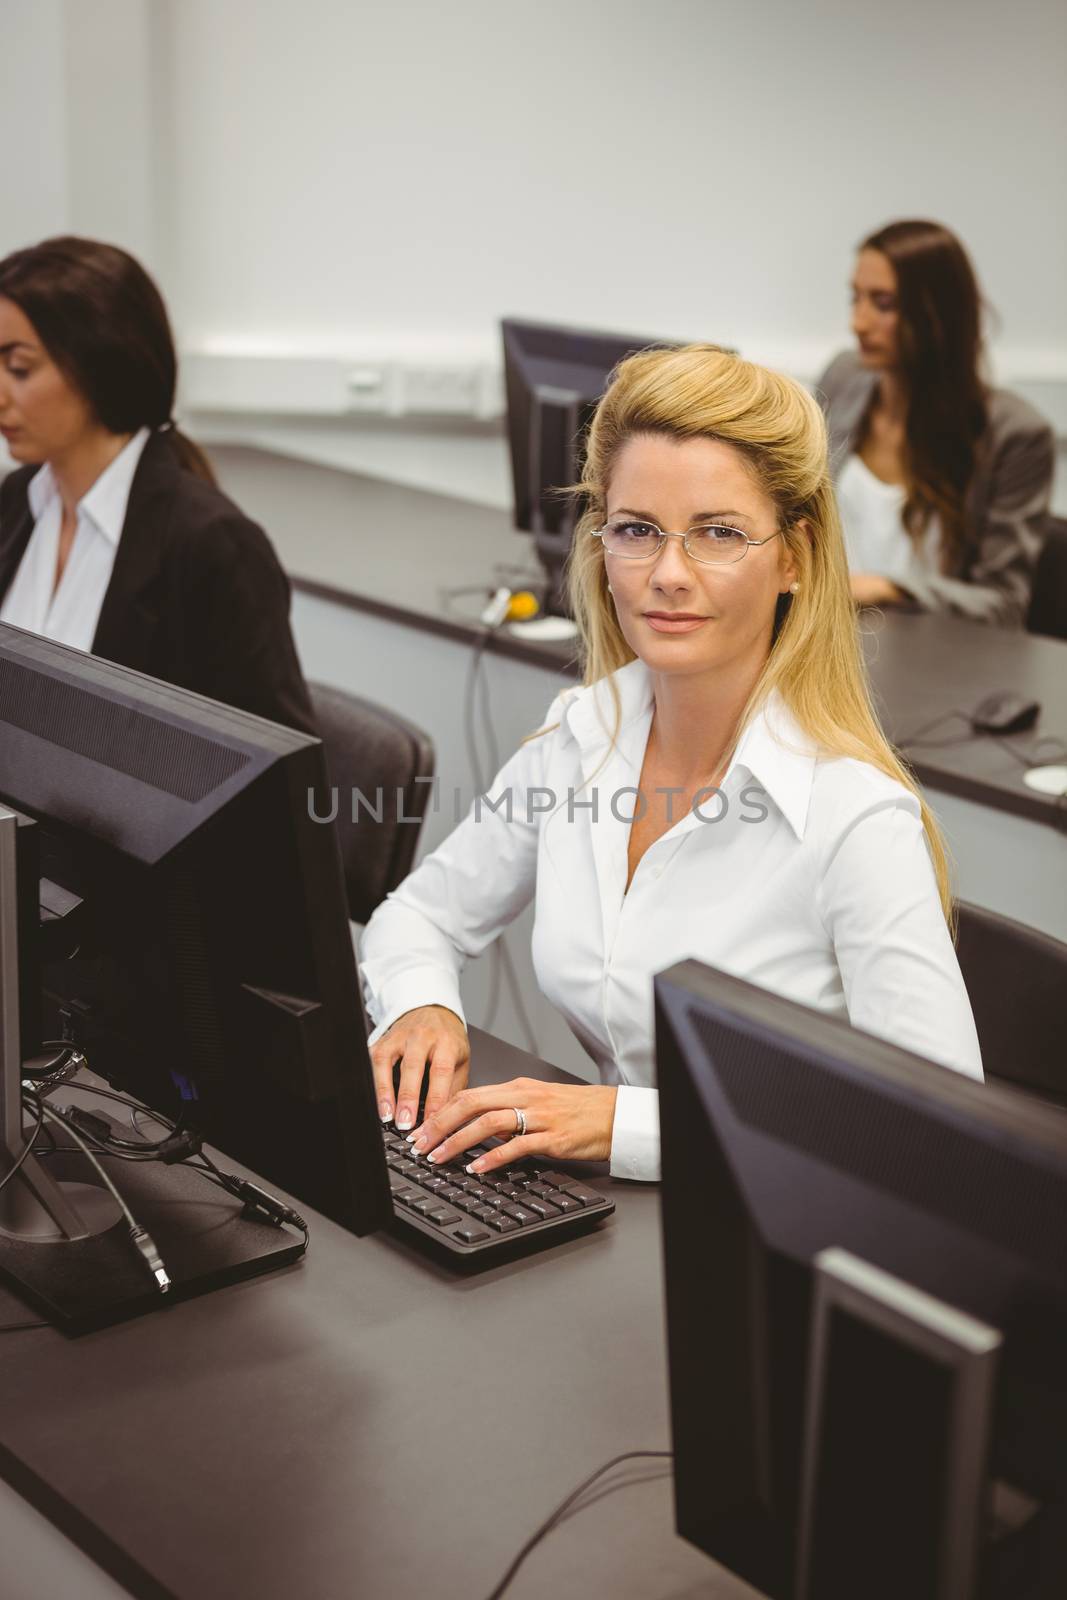 Smiling businesswoman working in computer room in the office